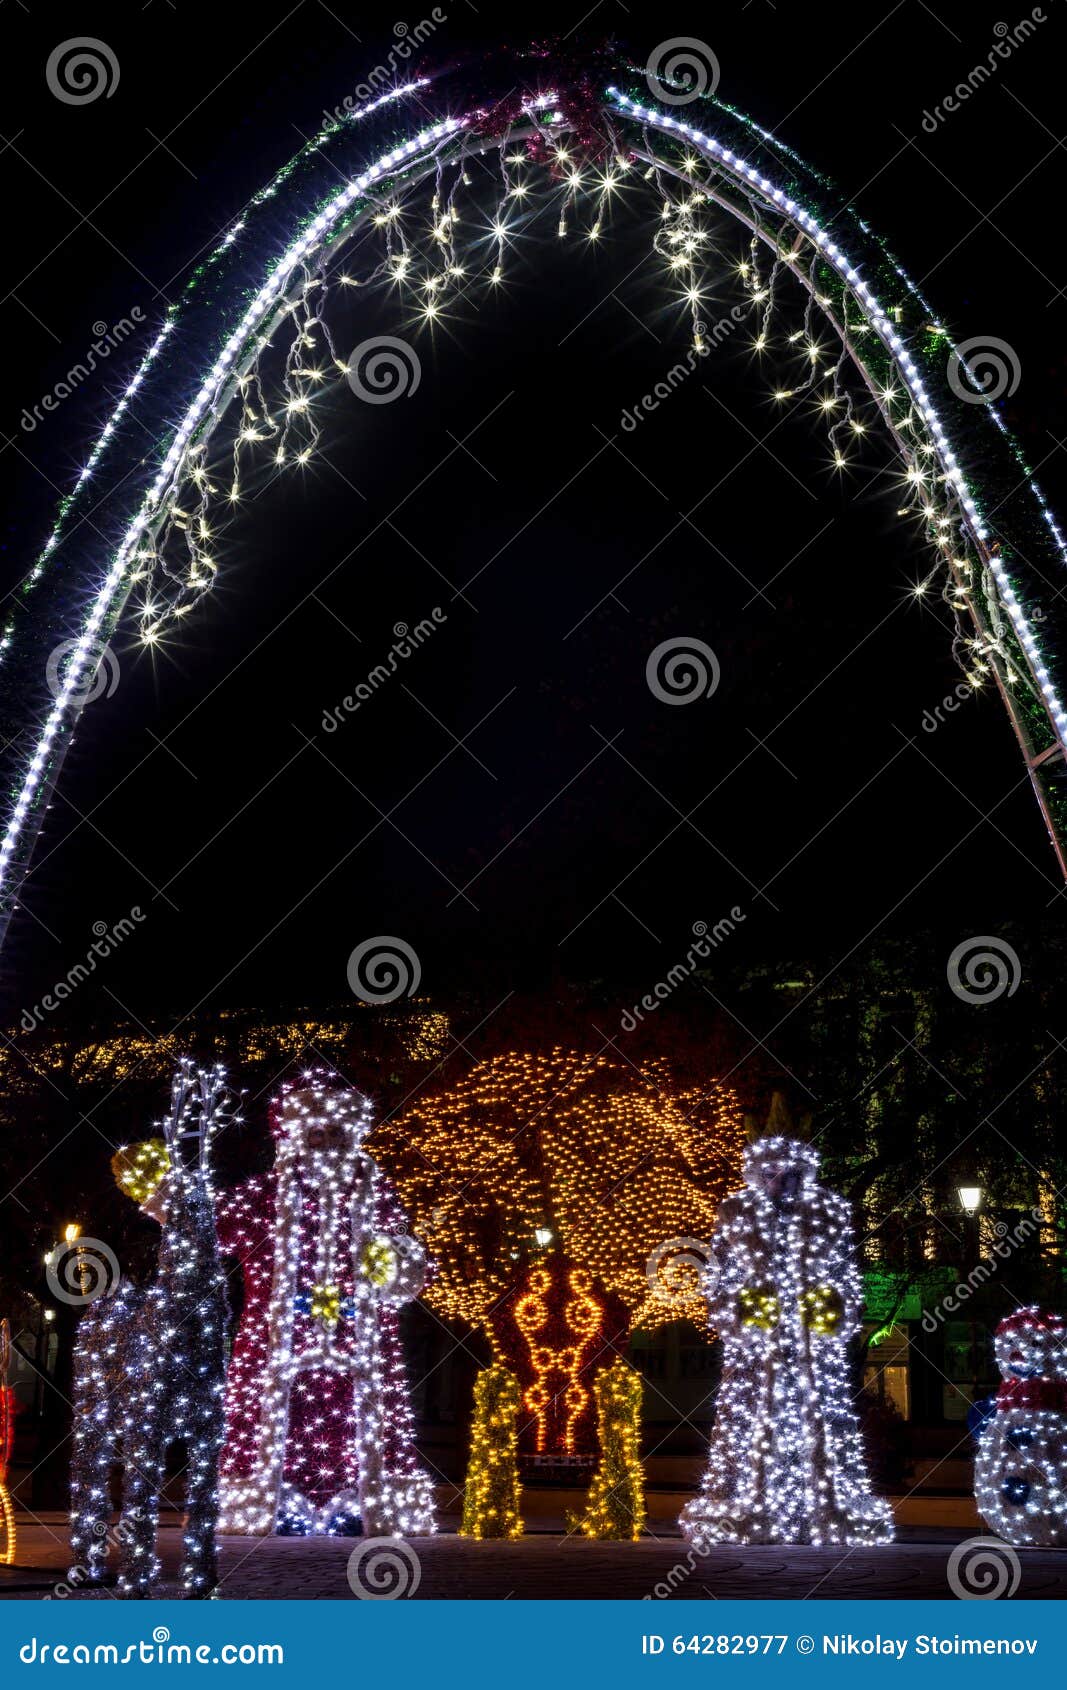 Santa and Snow Withe Under an Arch Stock Image - Image of equipment ...